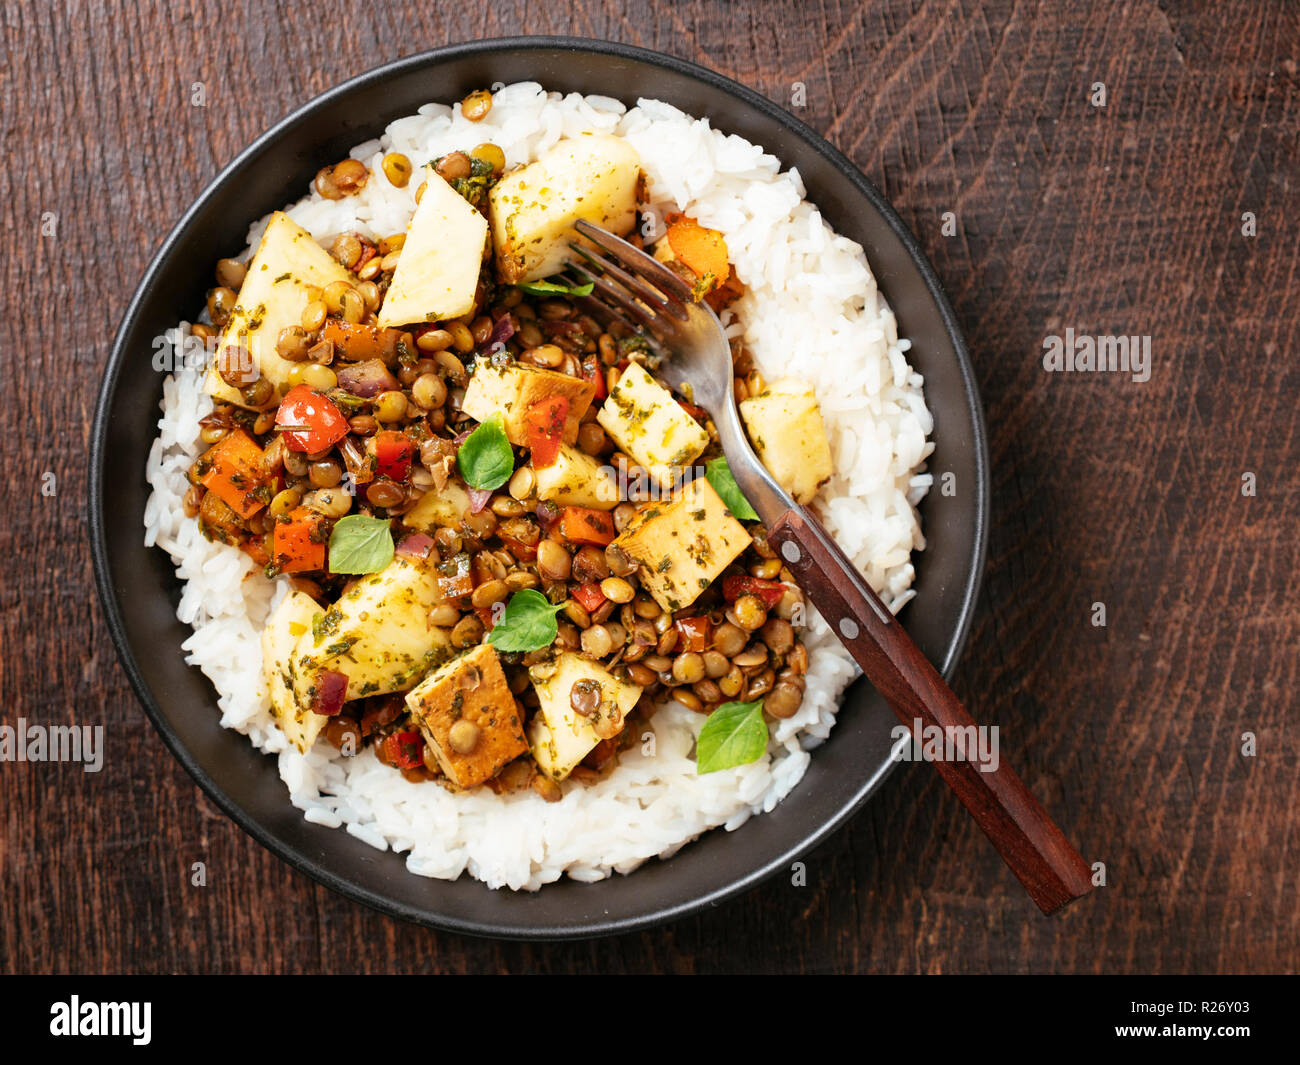 Sweet sour lentils with fresh pineapple and smokey tofu served on rice. Stock Photo